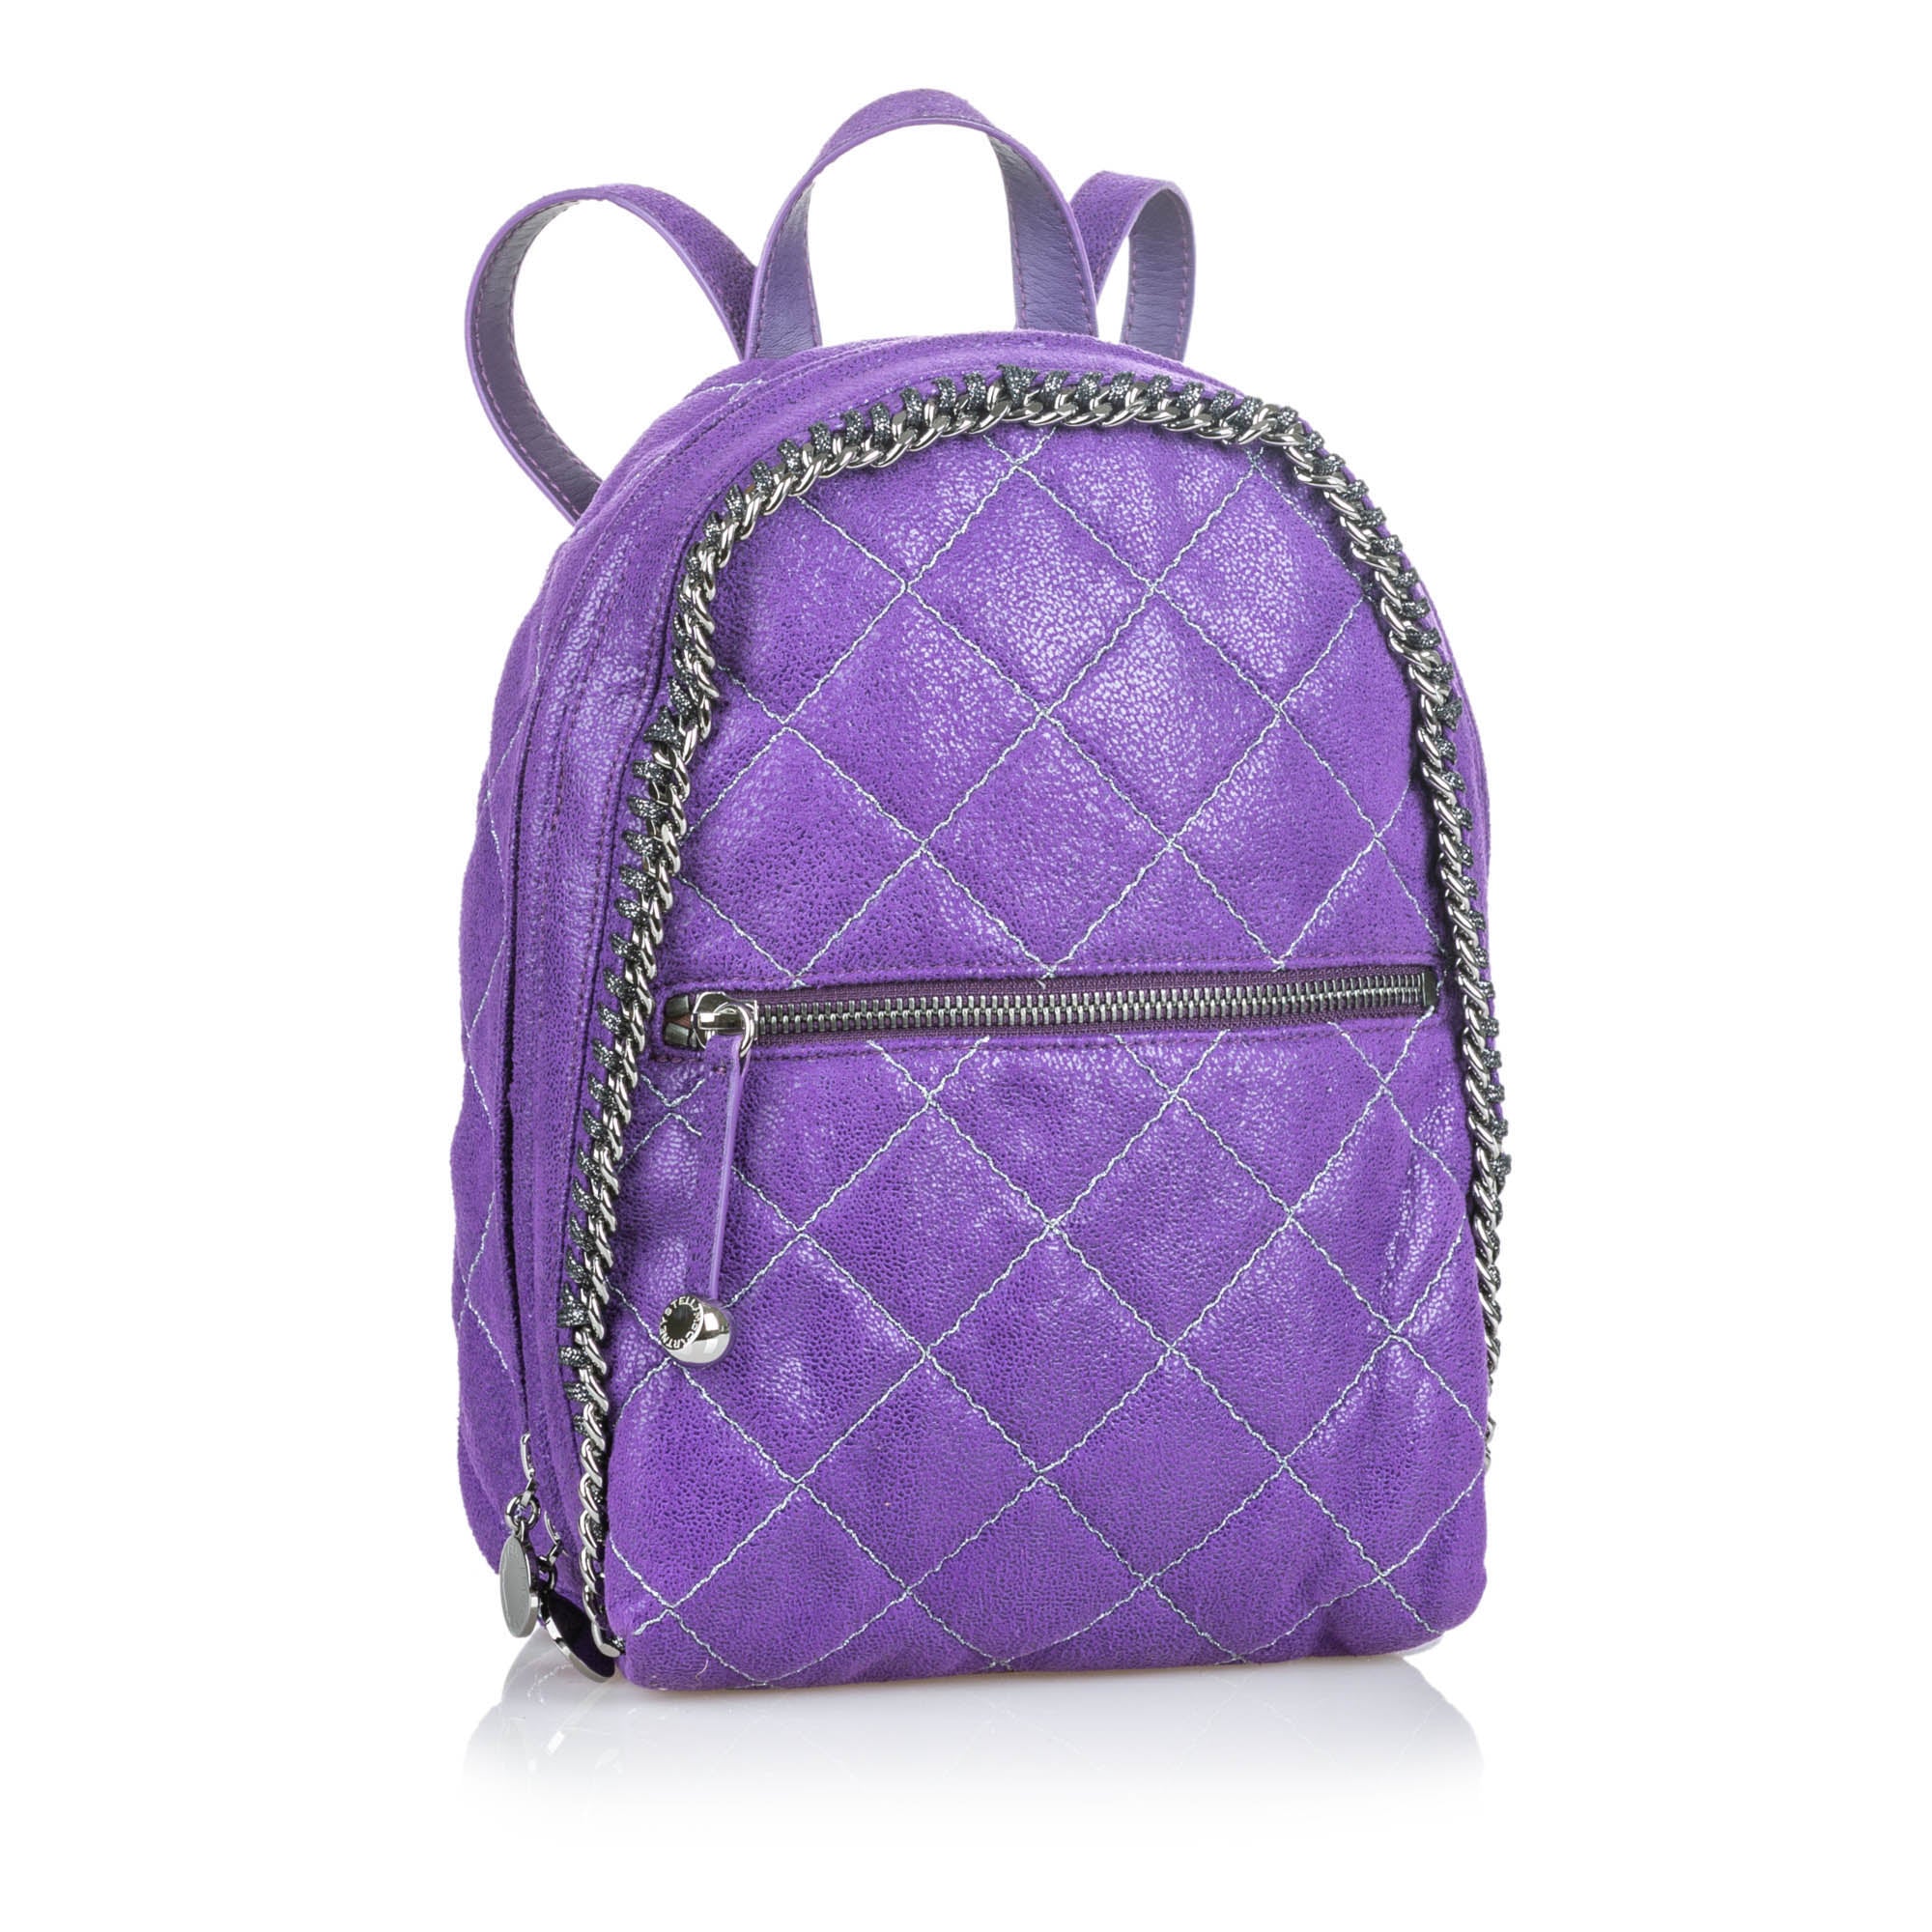 Buy & Consign Authentic Stella McCartney Quilted Leather Falabella Backpack at The Plush Posh